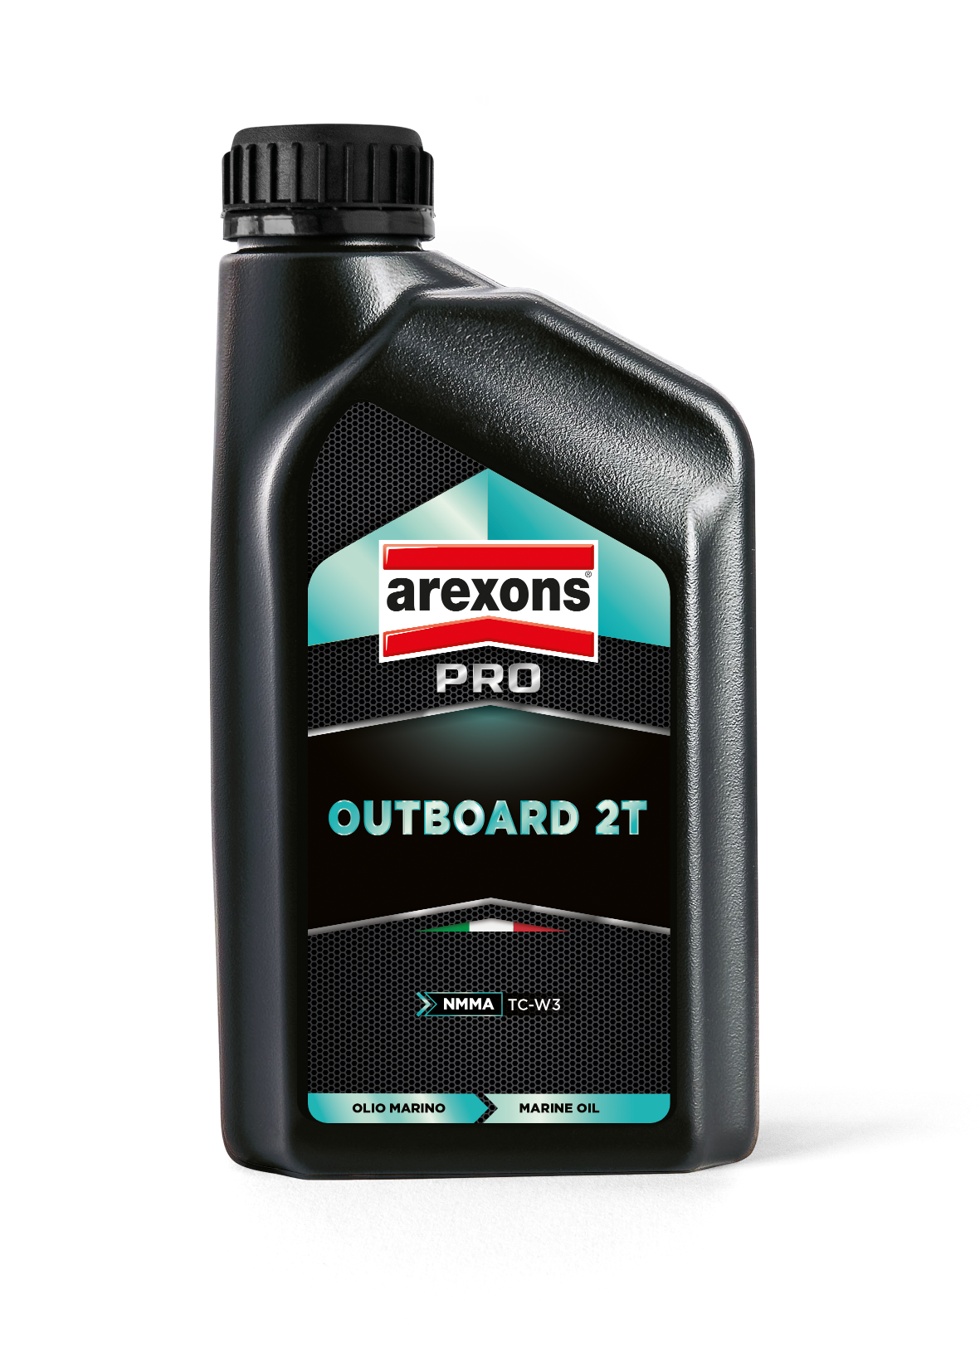 OUTBOARD 2T